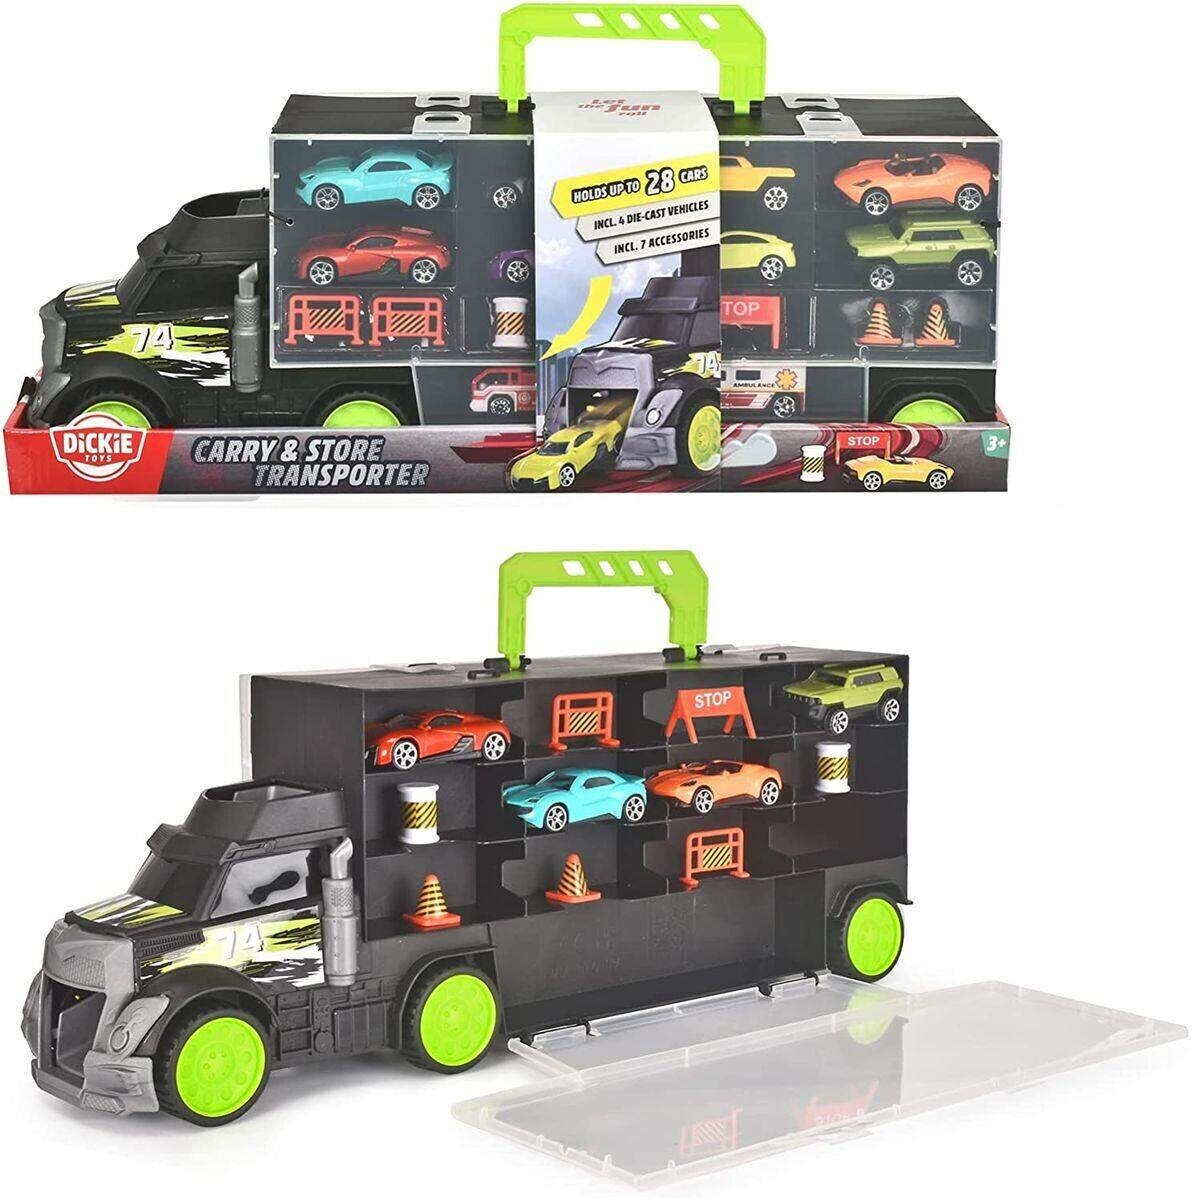 Dickie Toys Carry & Store Transporter (203747007)